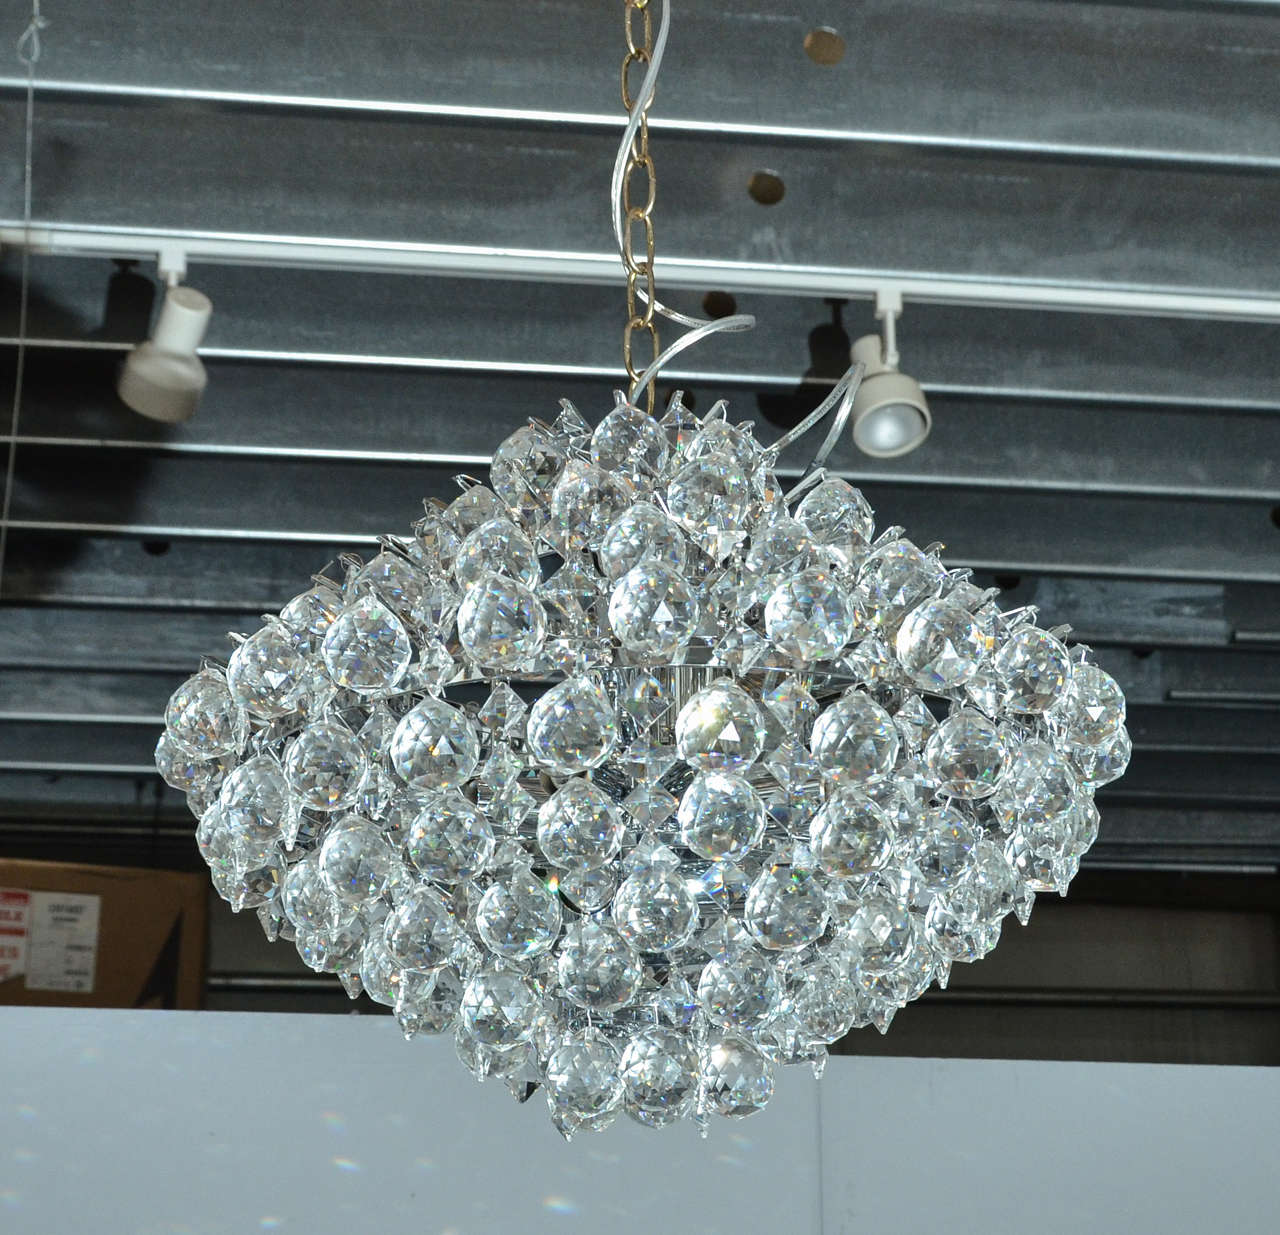 Modern crystal chandelier. Perfect in powder room or entrance hall. Really sings in a small space. High quality extremely sparkly crystal.